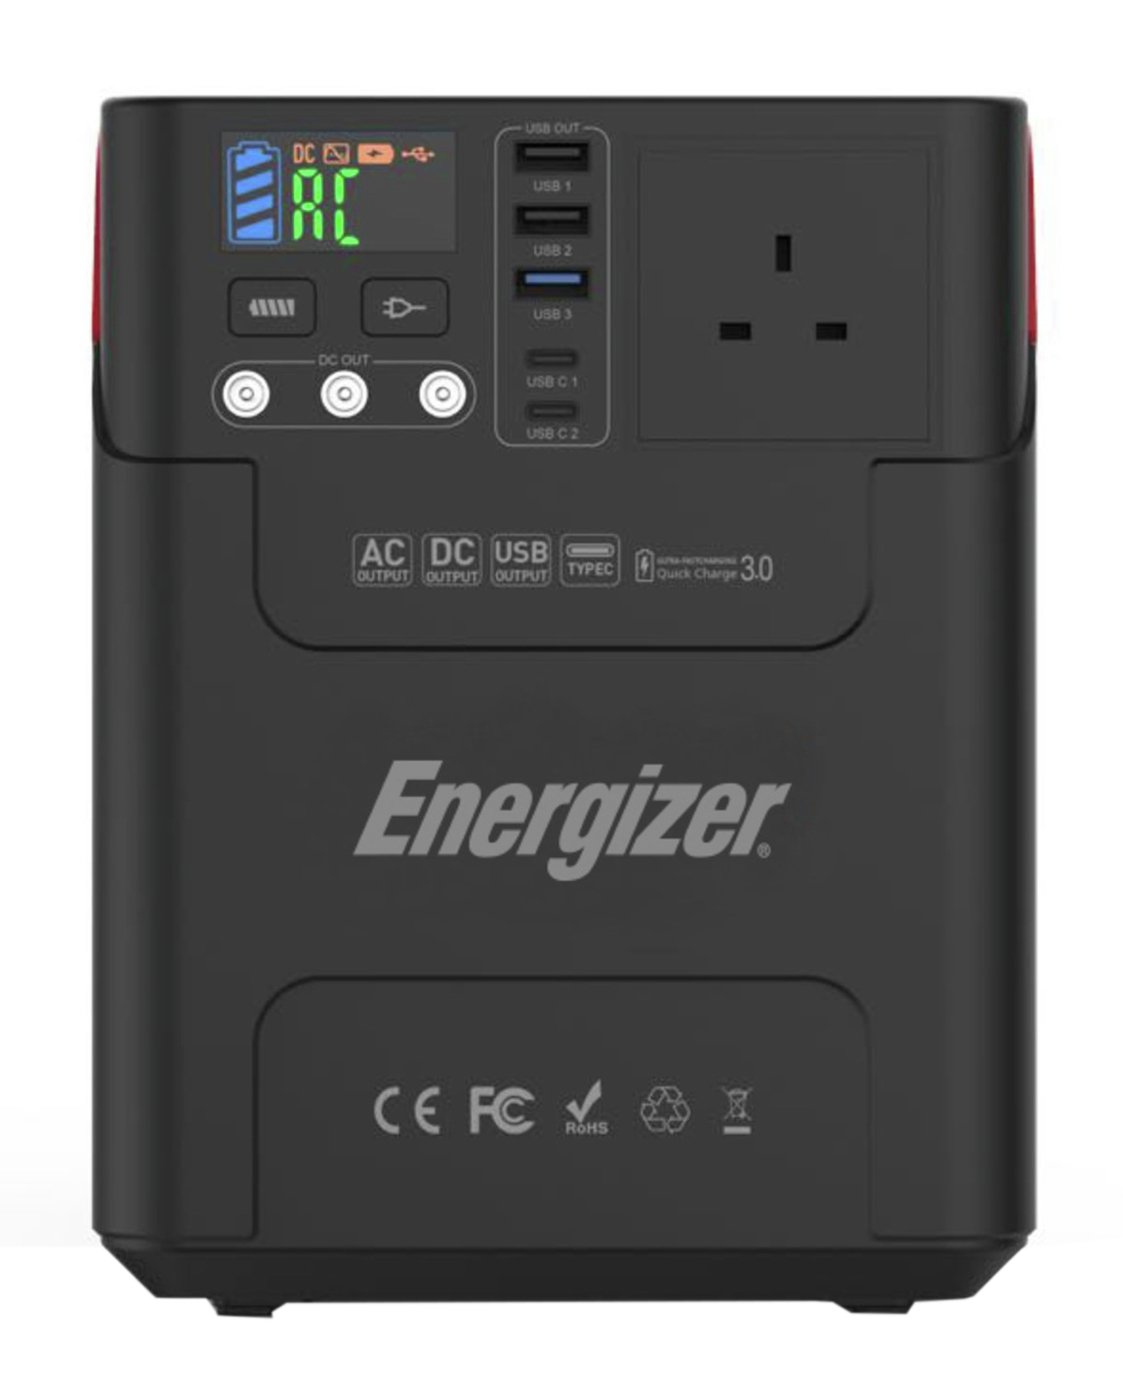 Energizer 222wH Portable Power Station Review